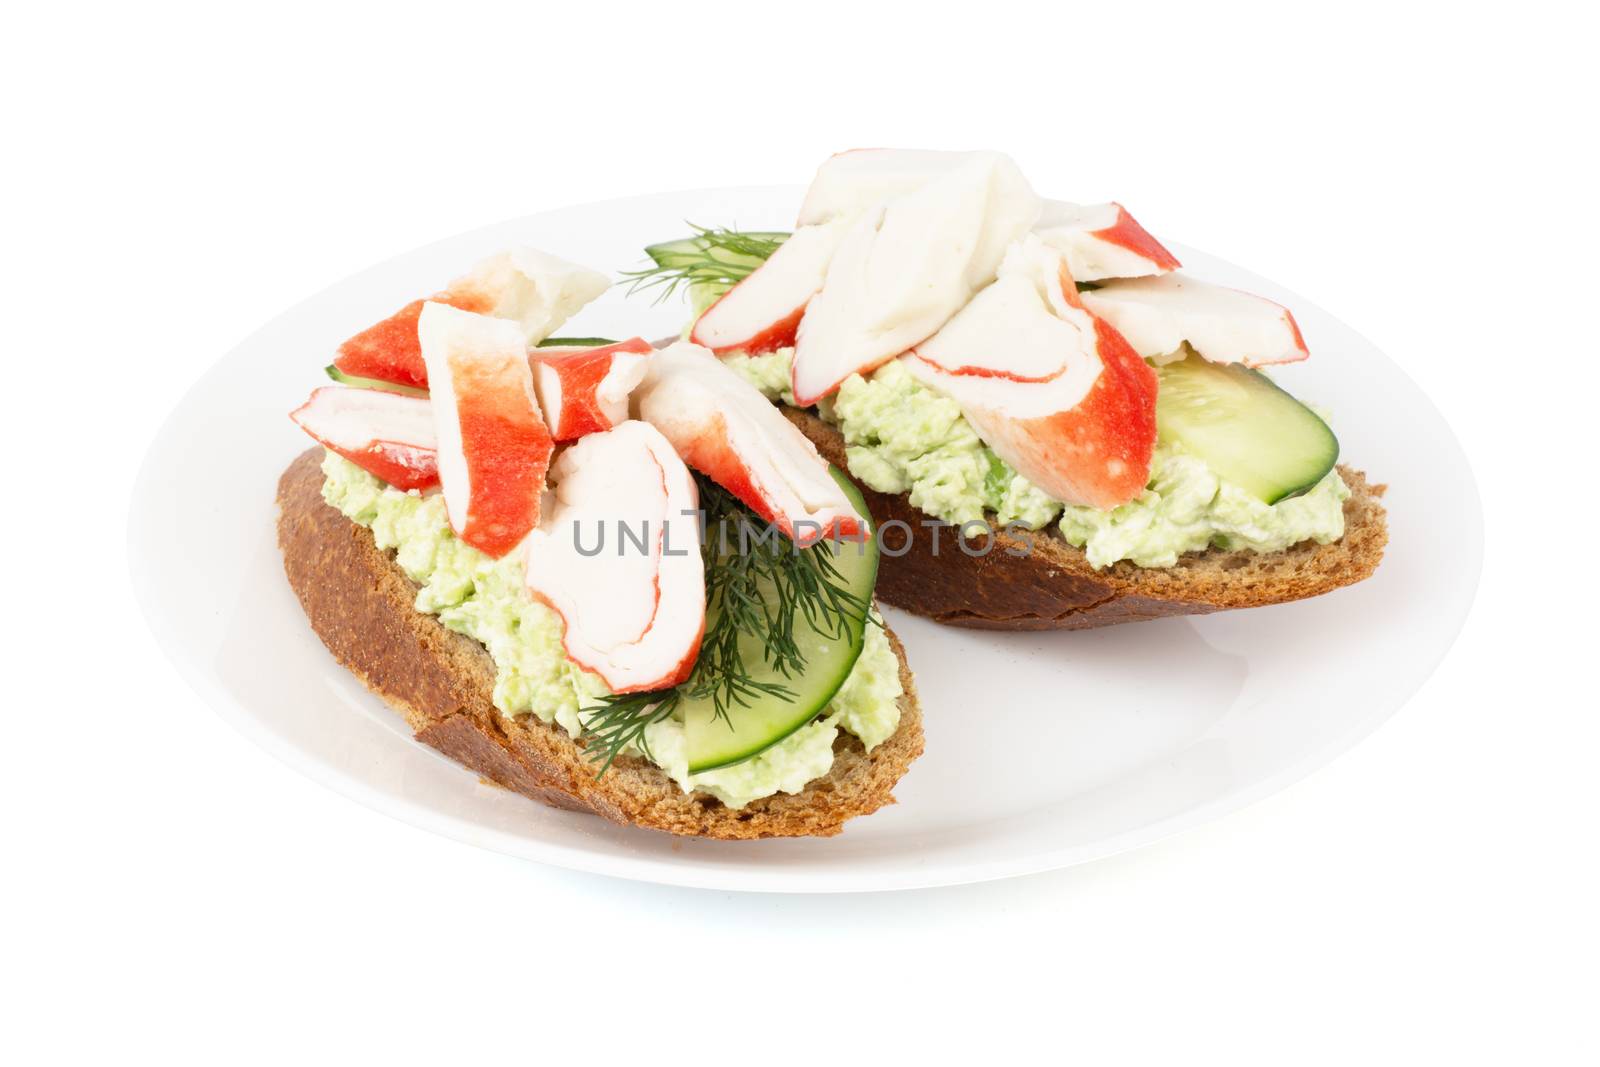 Crab sticks cut meat and vegetables avocado cucumbers sauce on rye bread sadswich on plate isolated on white background